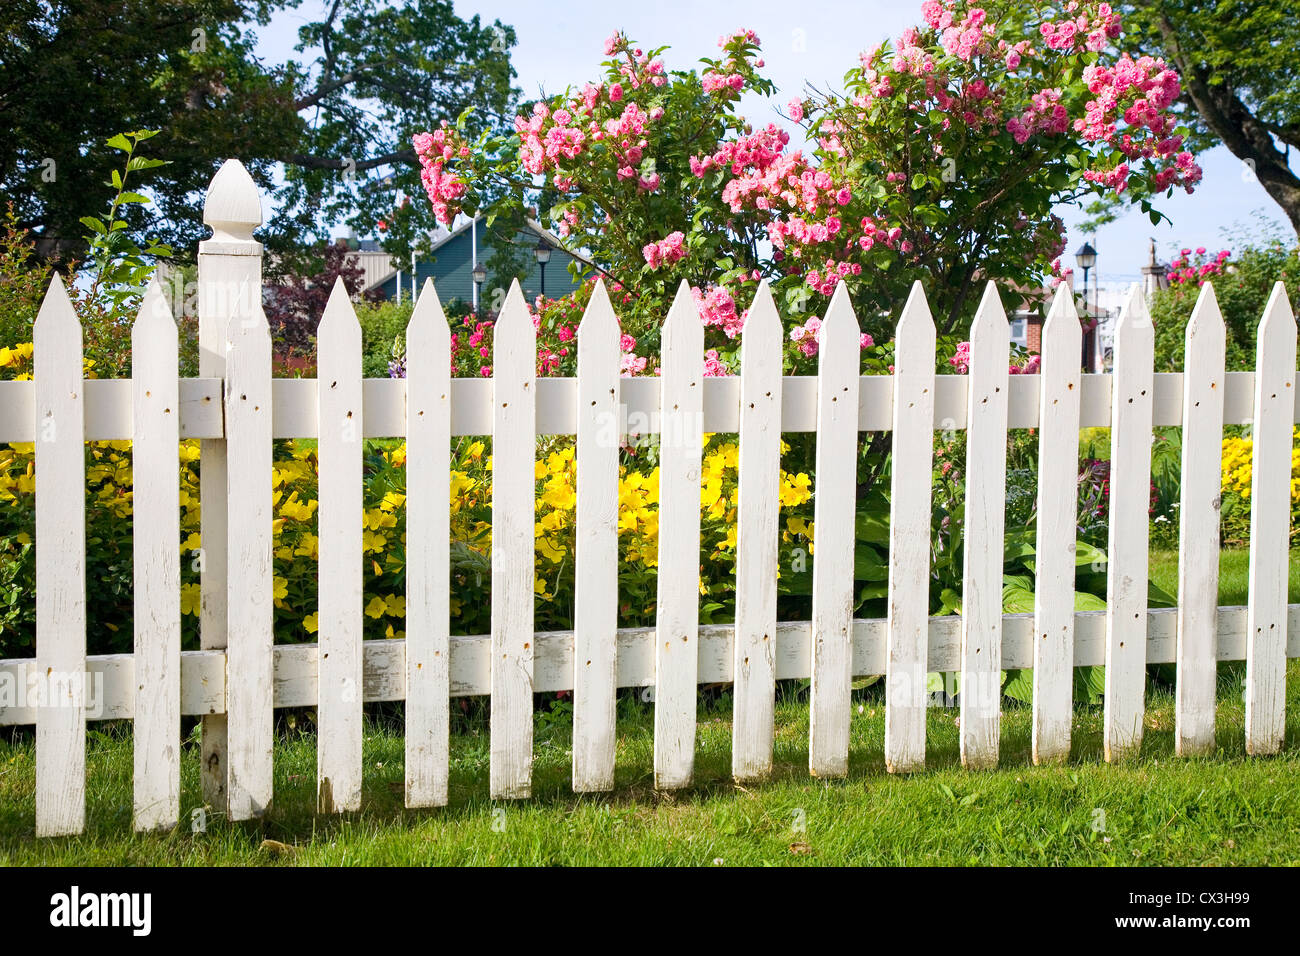 Rustic white picket fence with roses and other flowers in the background. Stock Photo